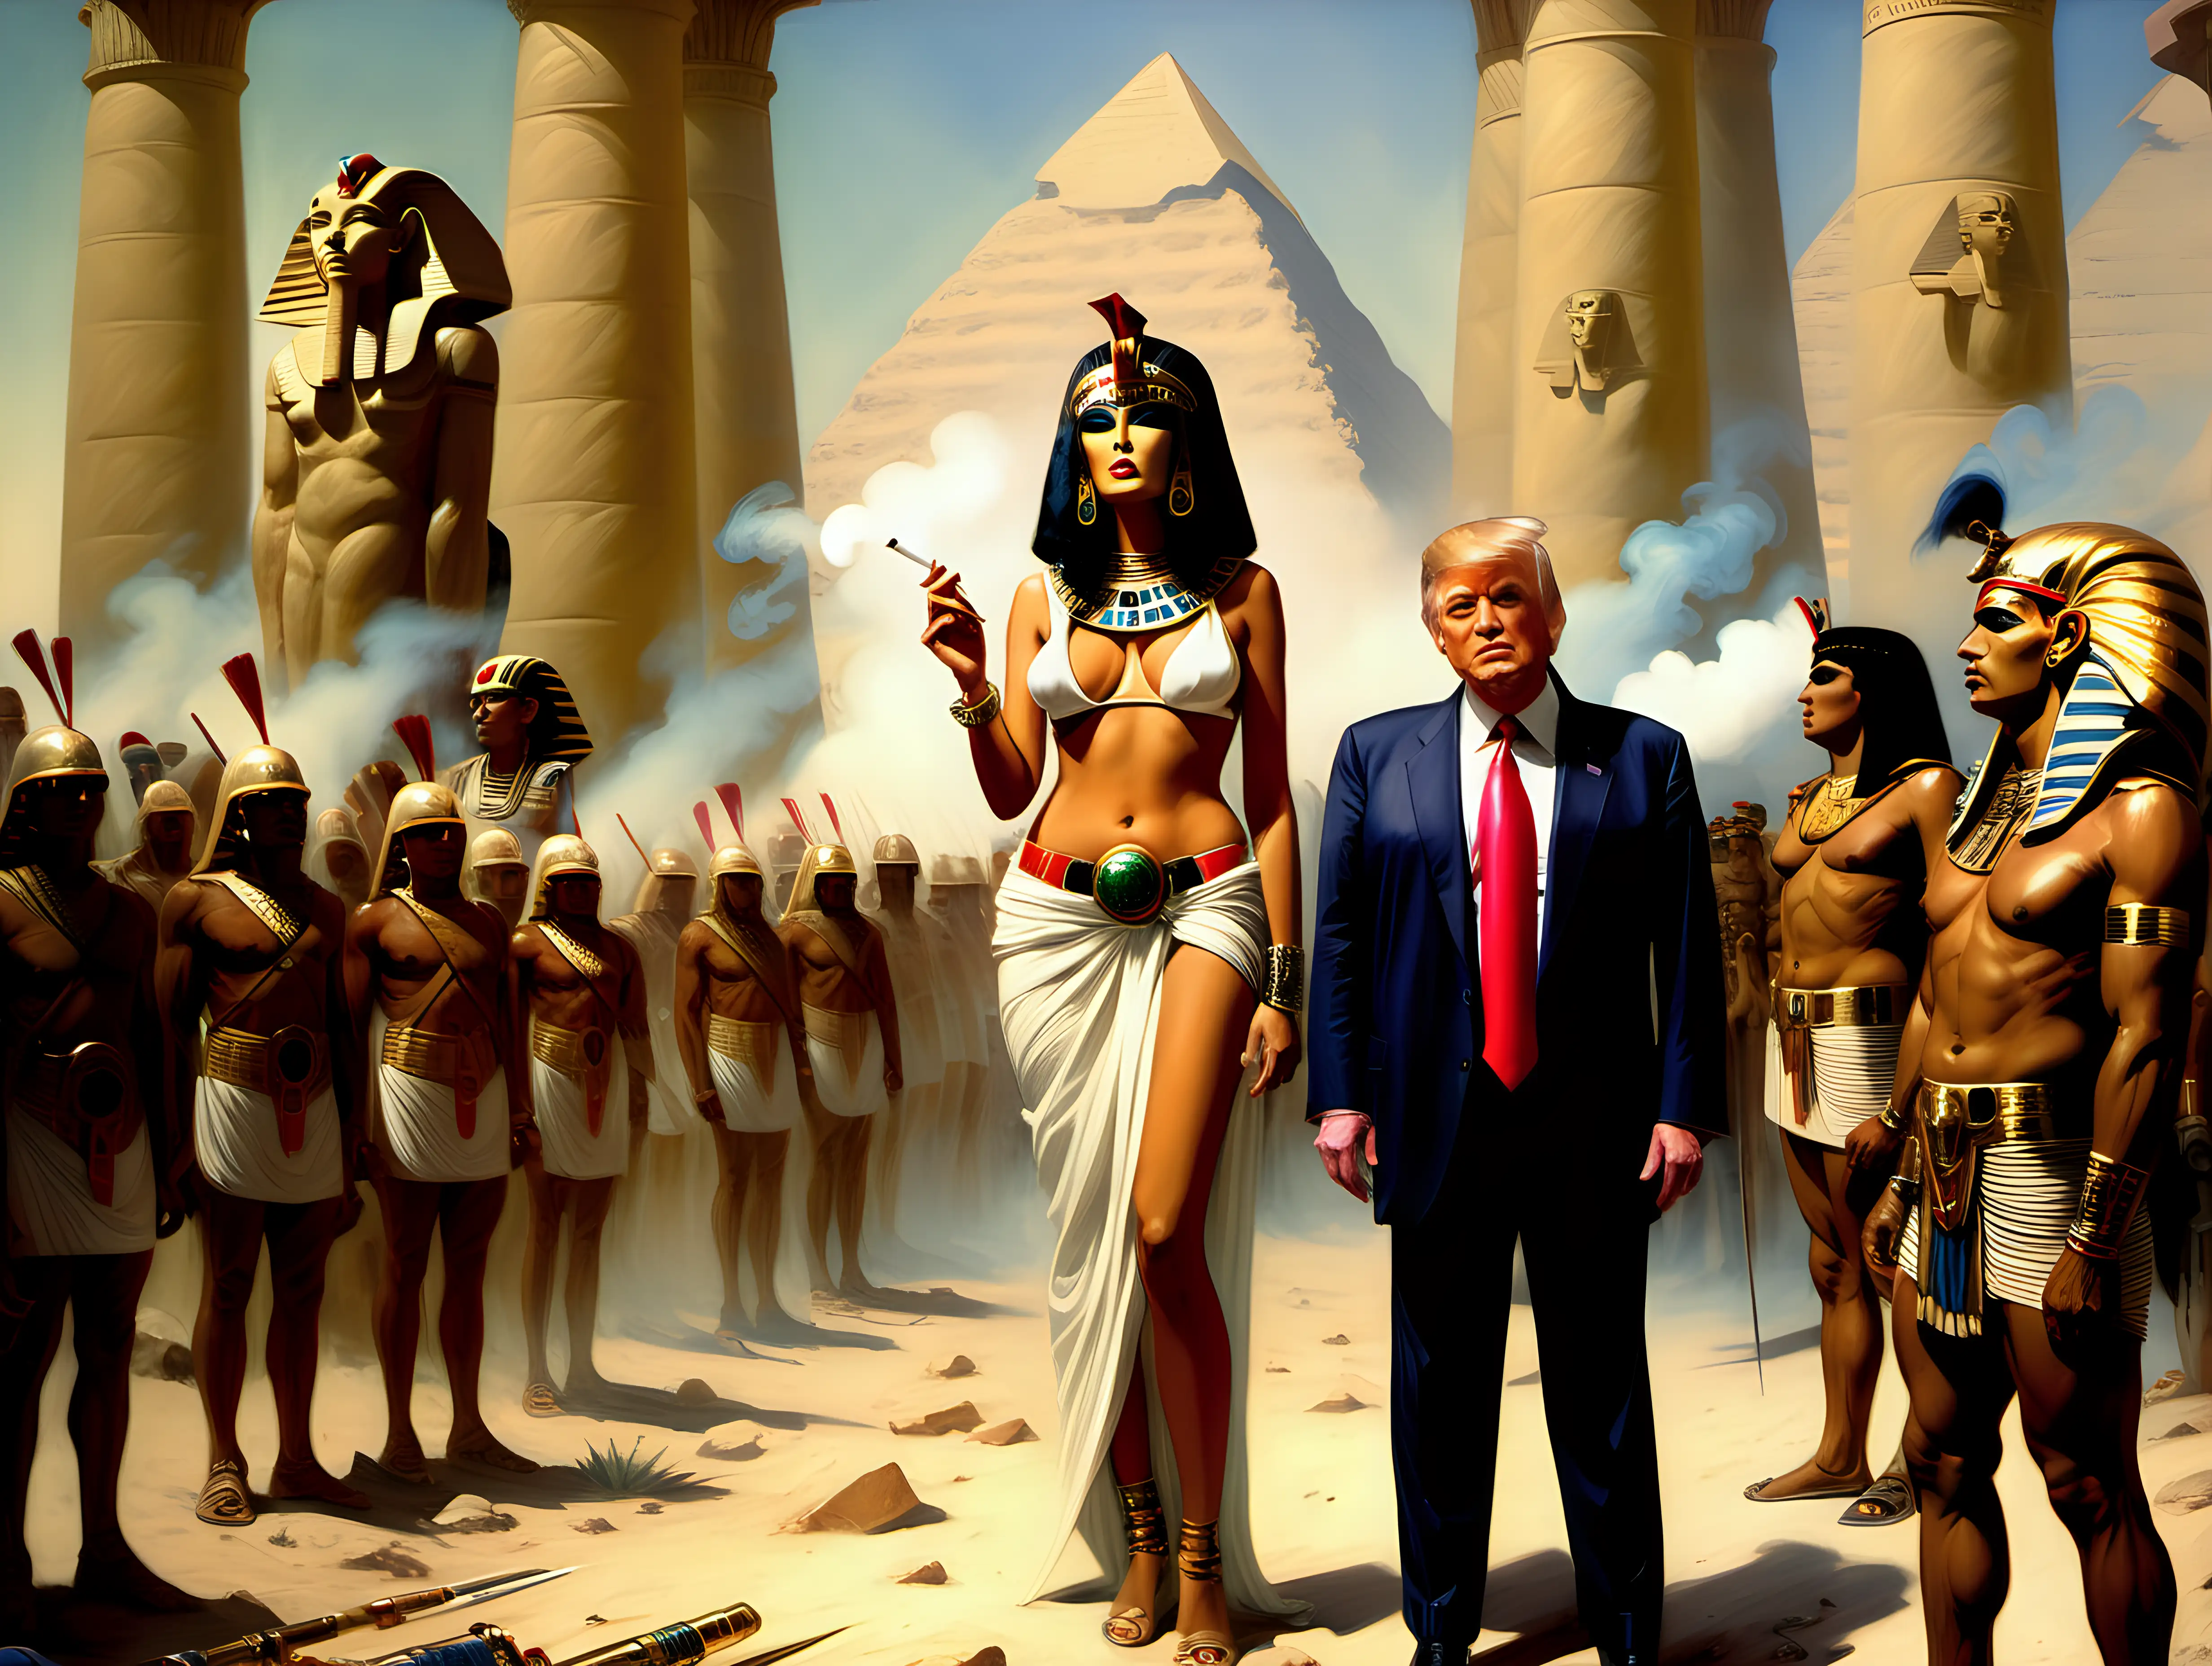 Unlikely Encounter Donald Trump and Cleopatra in an Egyptian Odyssey